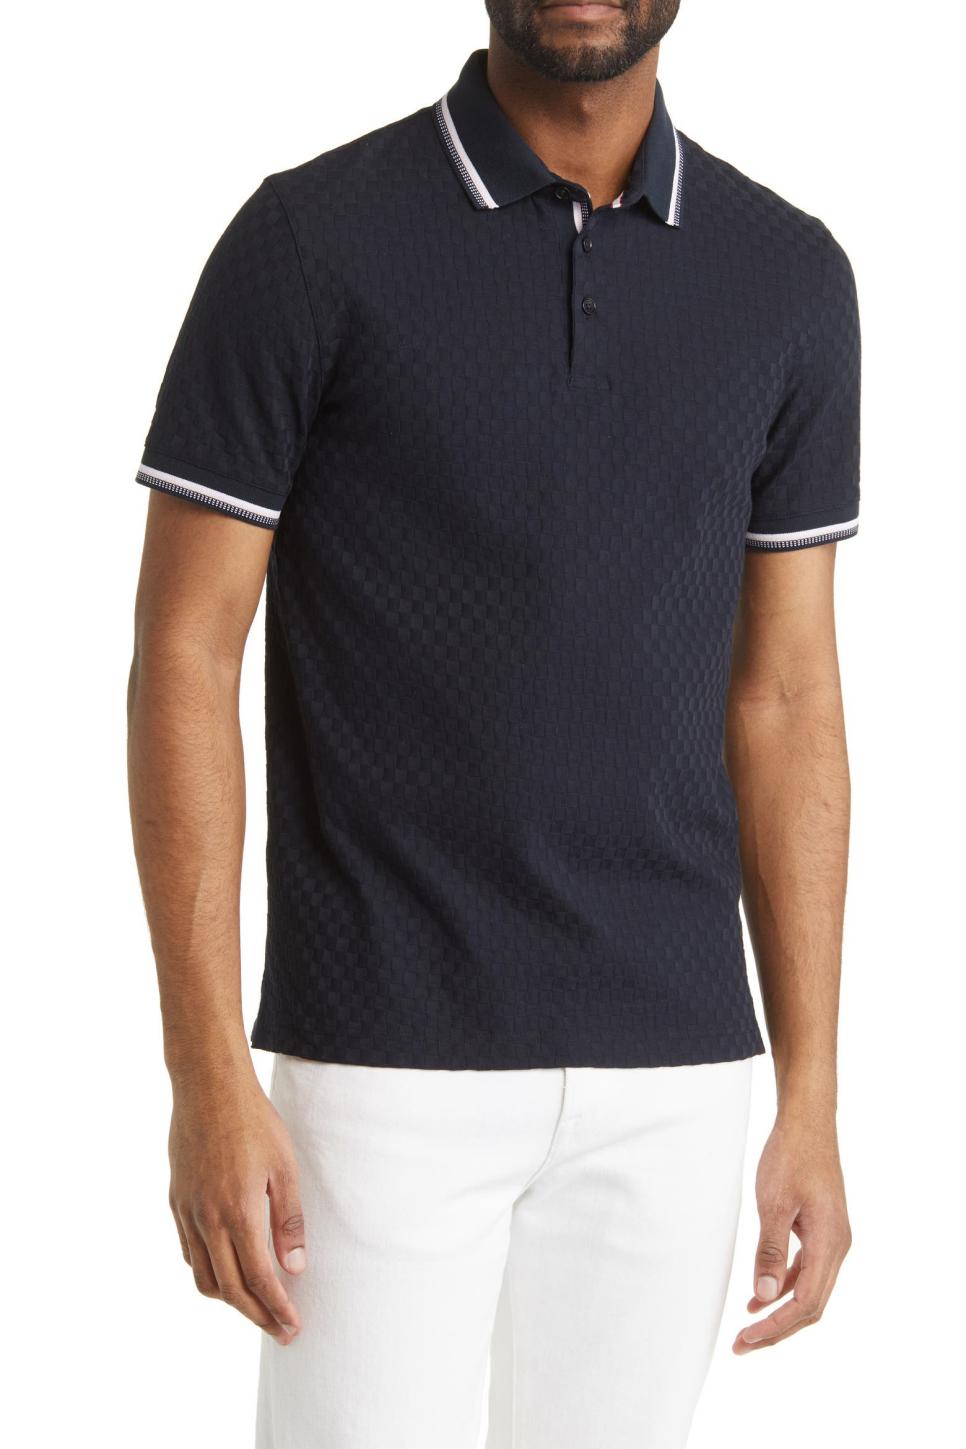 Ted Baker Palos Regular Fit Textured Cotton Knit Polo